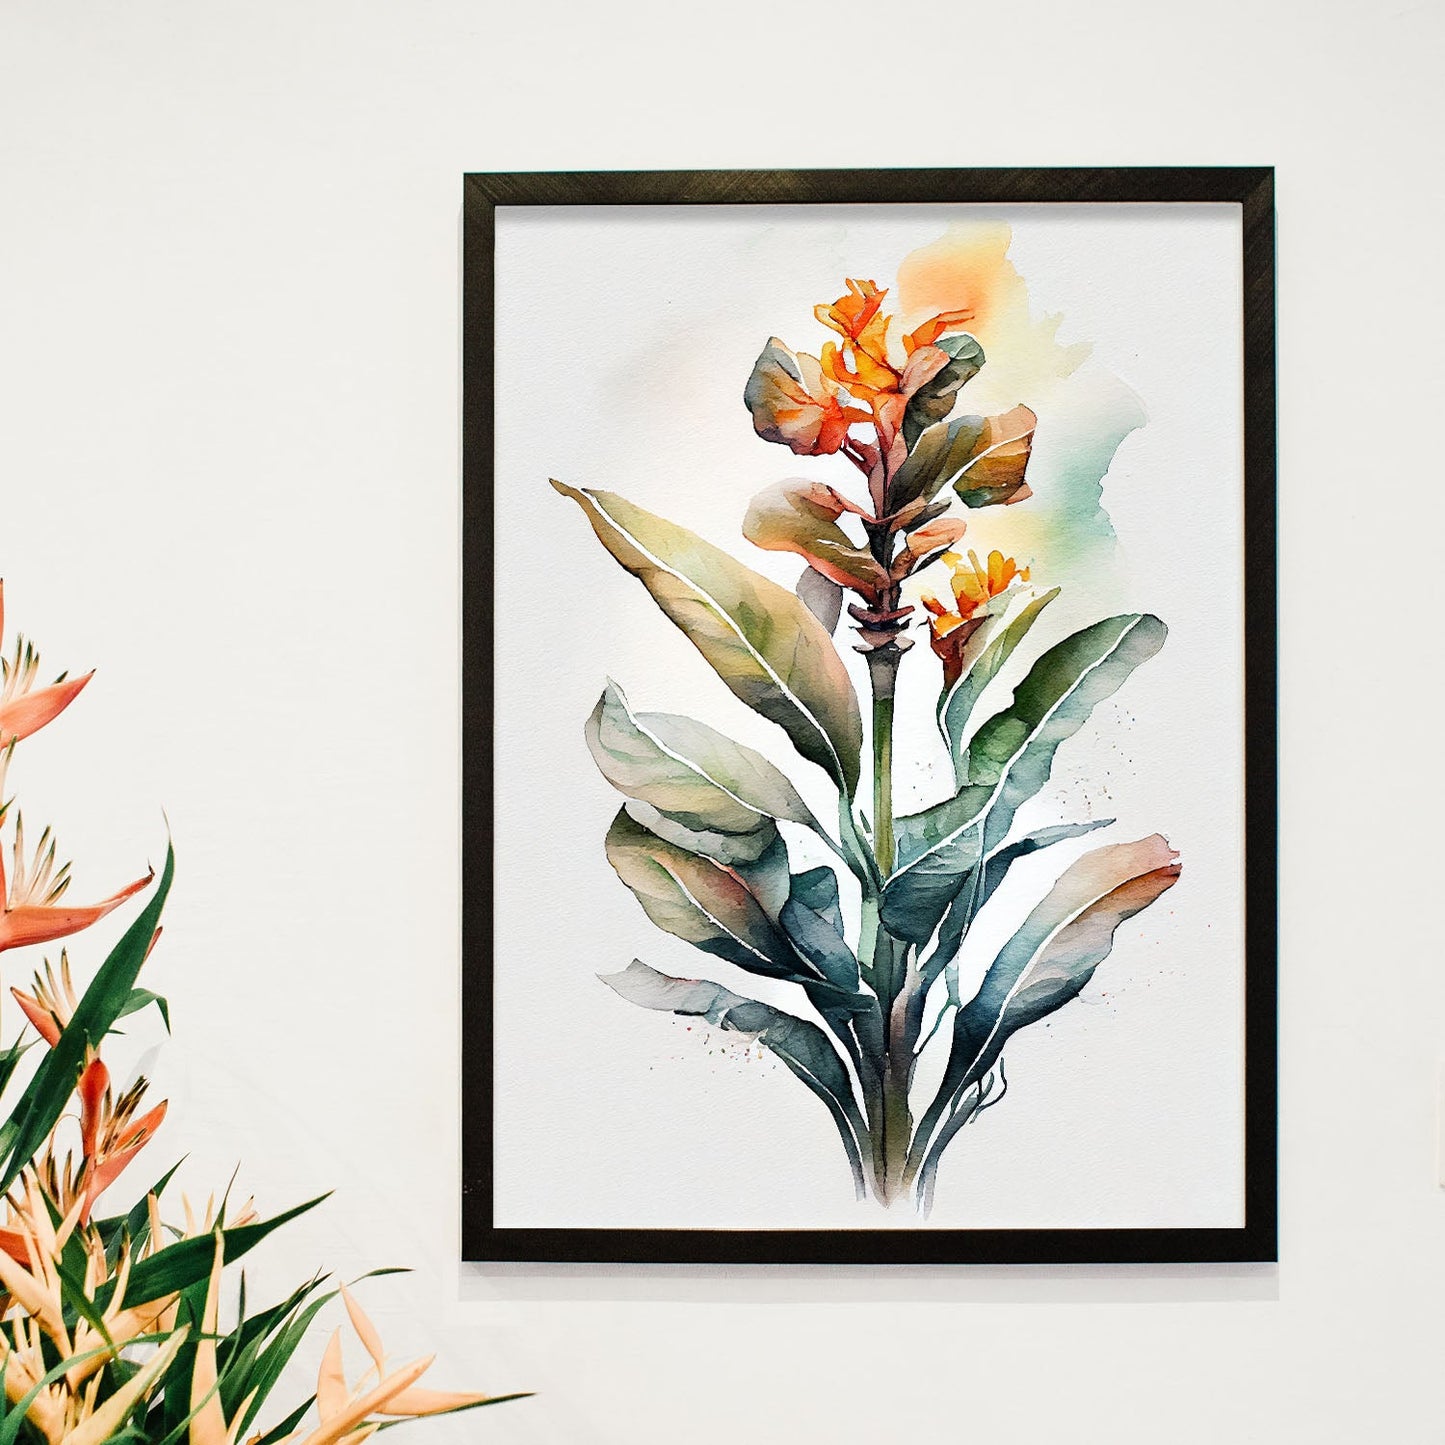 Nacnic watercolor minmal Canna_1. Aesthetic Wall Art Prints for Bedroom or Living Room Design.